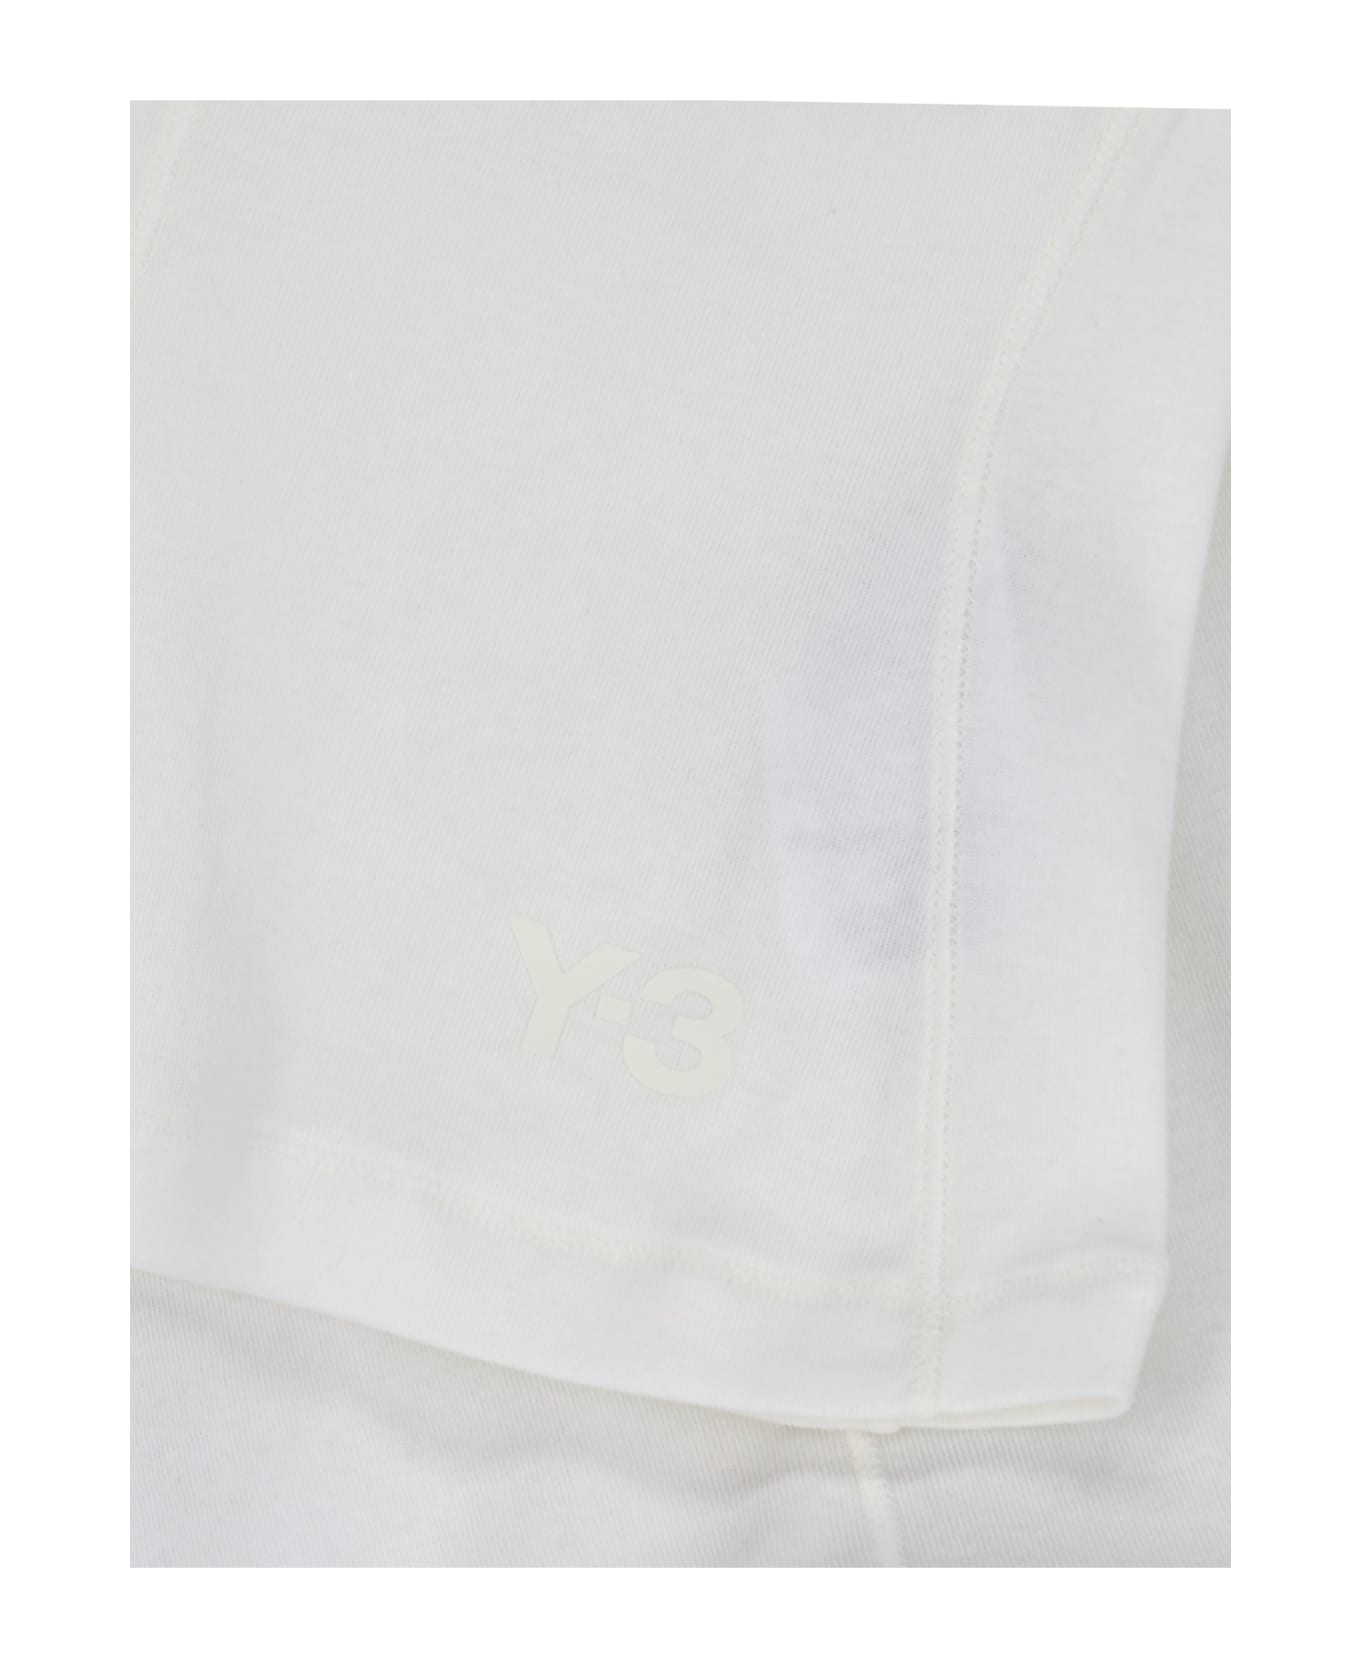 Y-3 Logo Fitted T-shirt - OFF WHITE